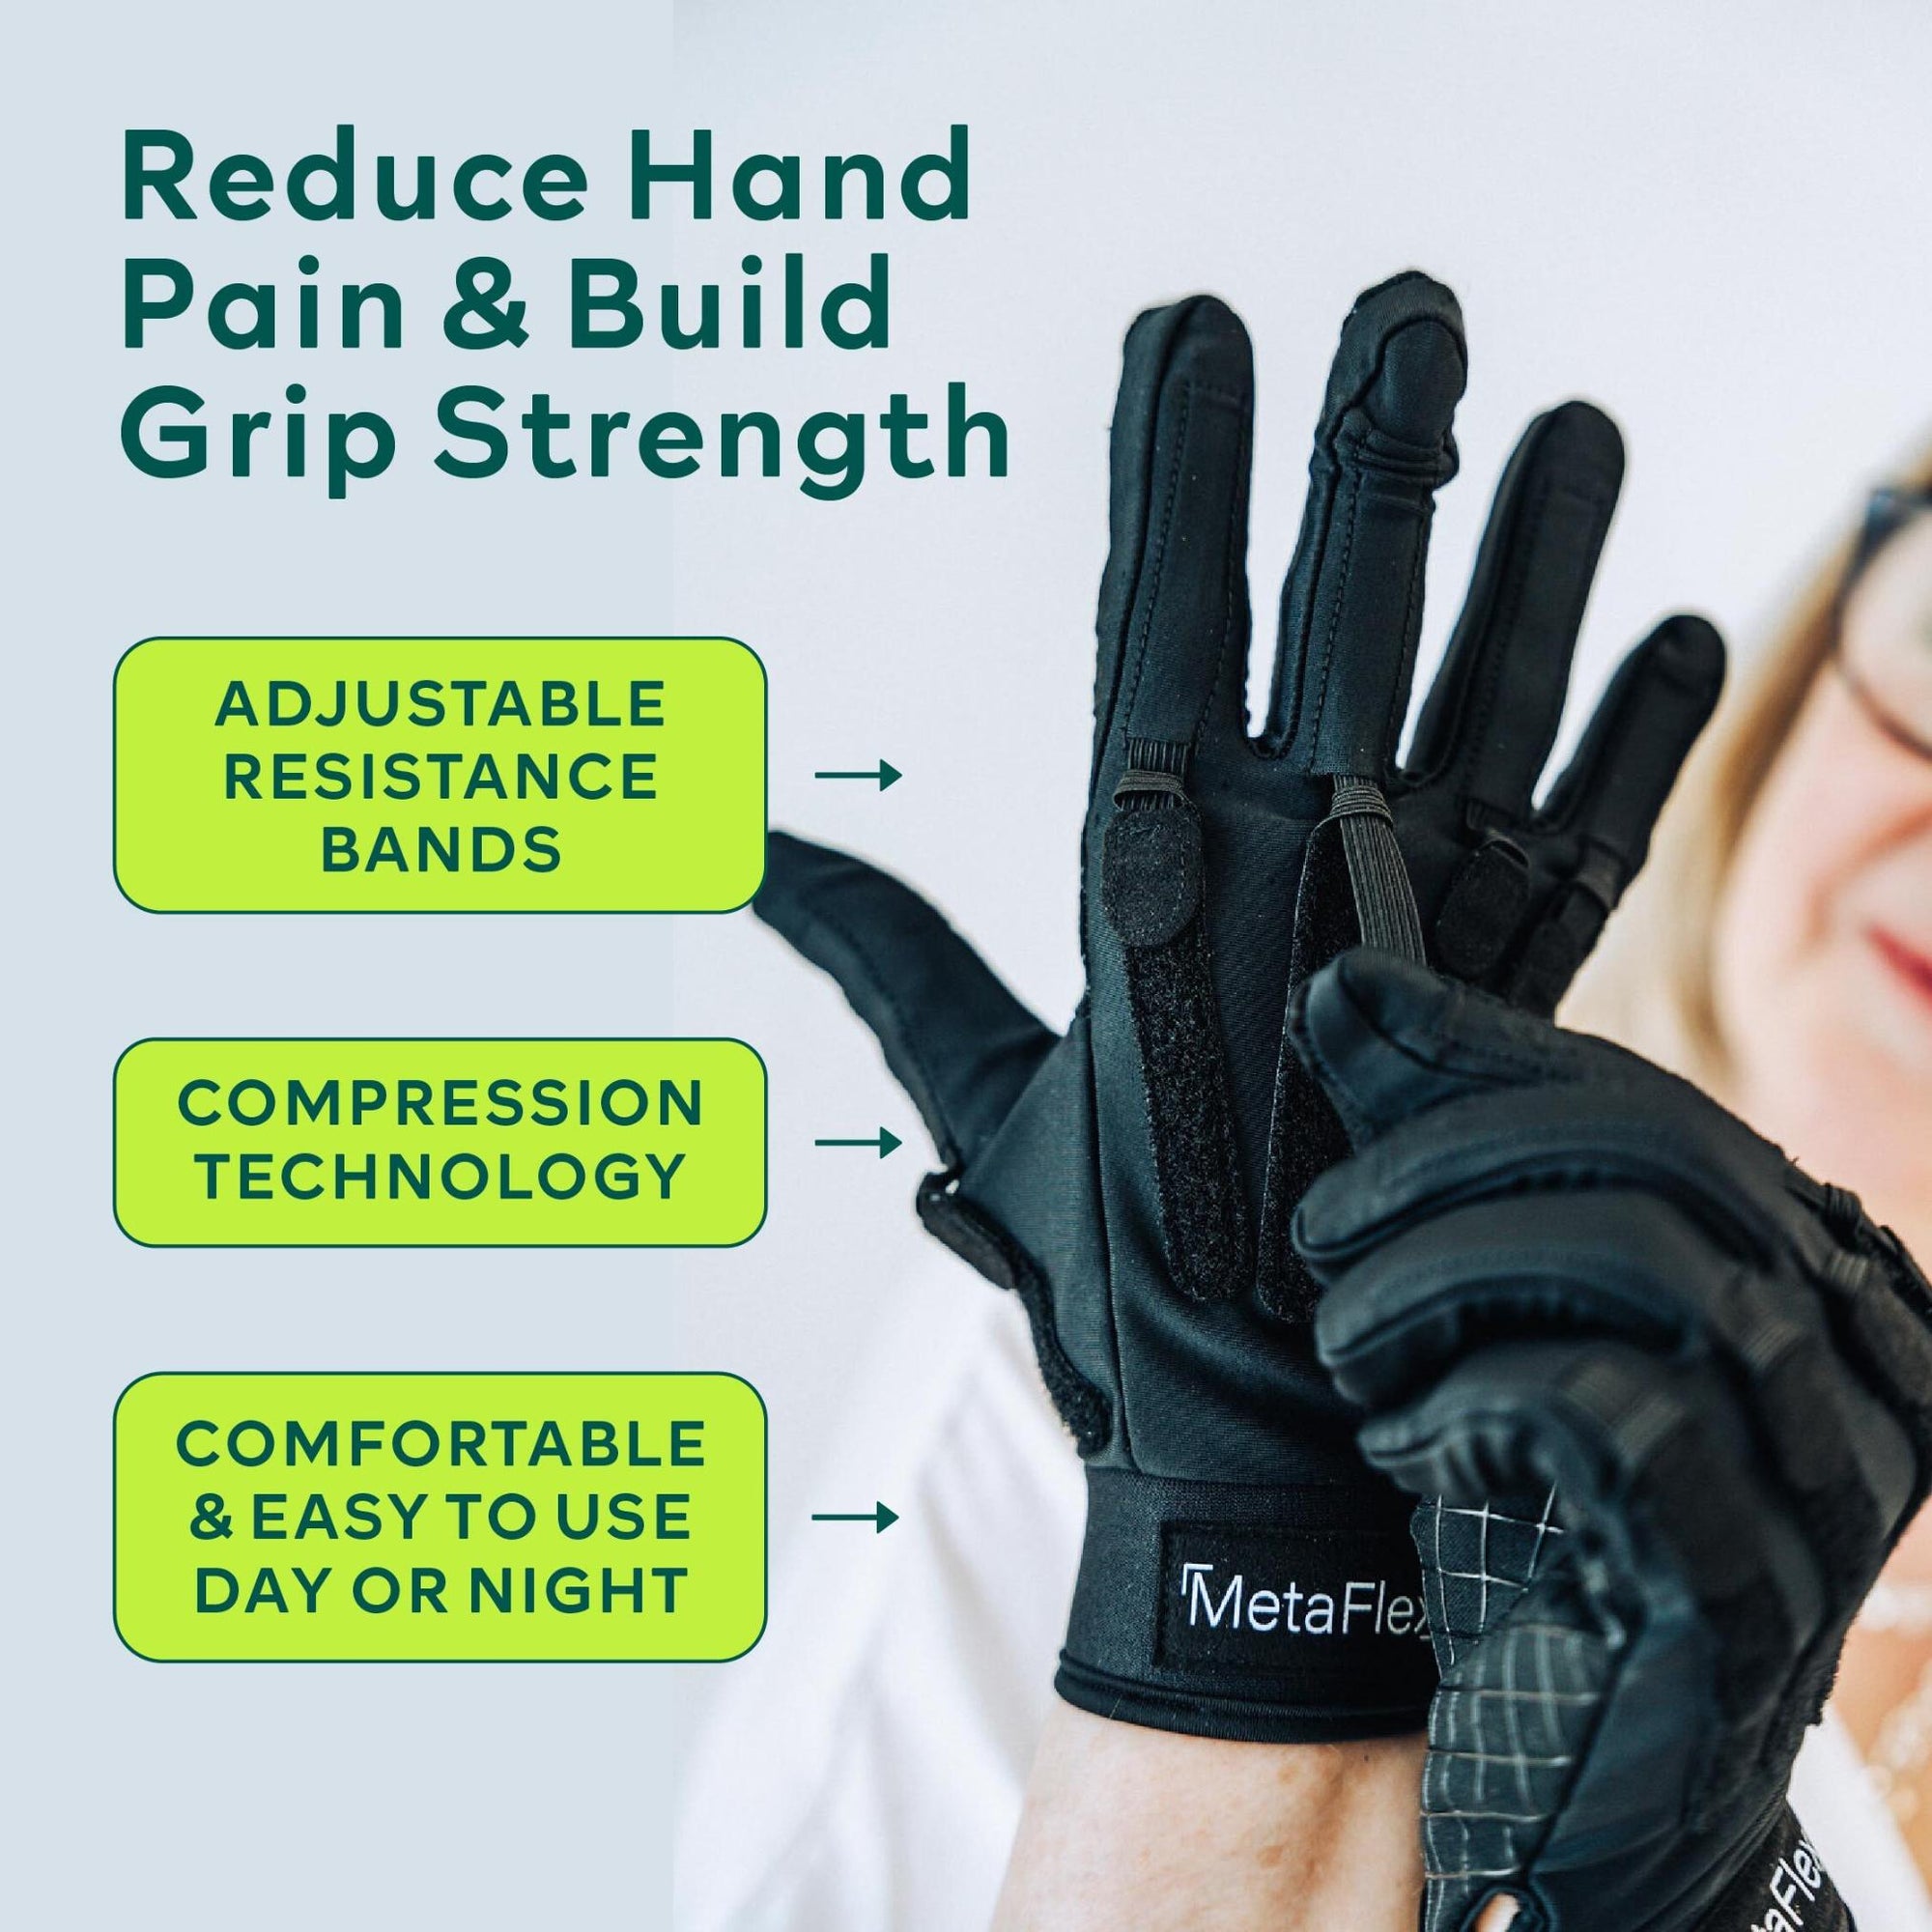 MetaFlex Adjustable Grip Strengthener Compression gloves innovate with adjustable resistance to improve grip strength and mobility, effective compression, non-slip grip palm, and provide comfortable and effective pain relief, day and night